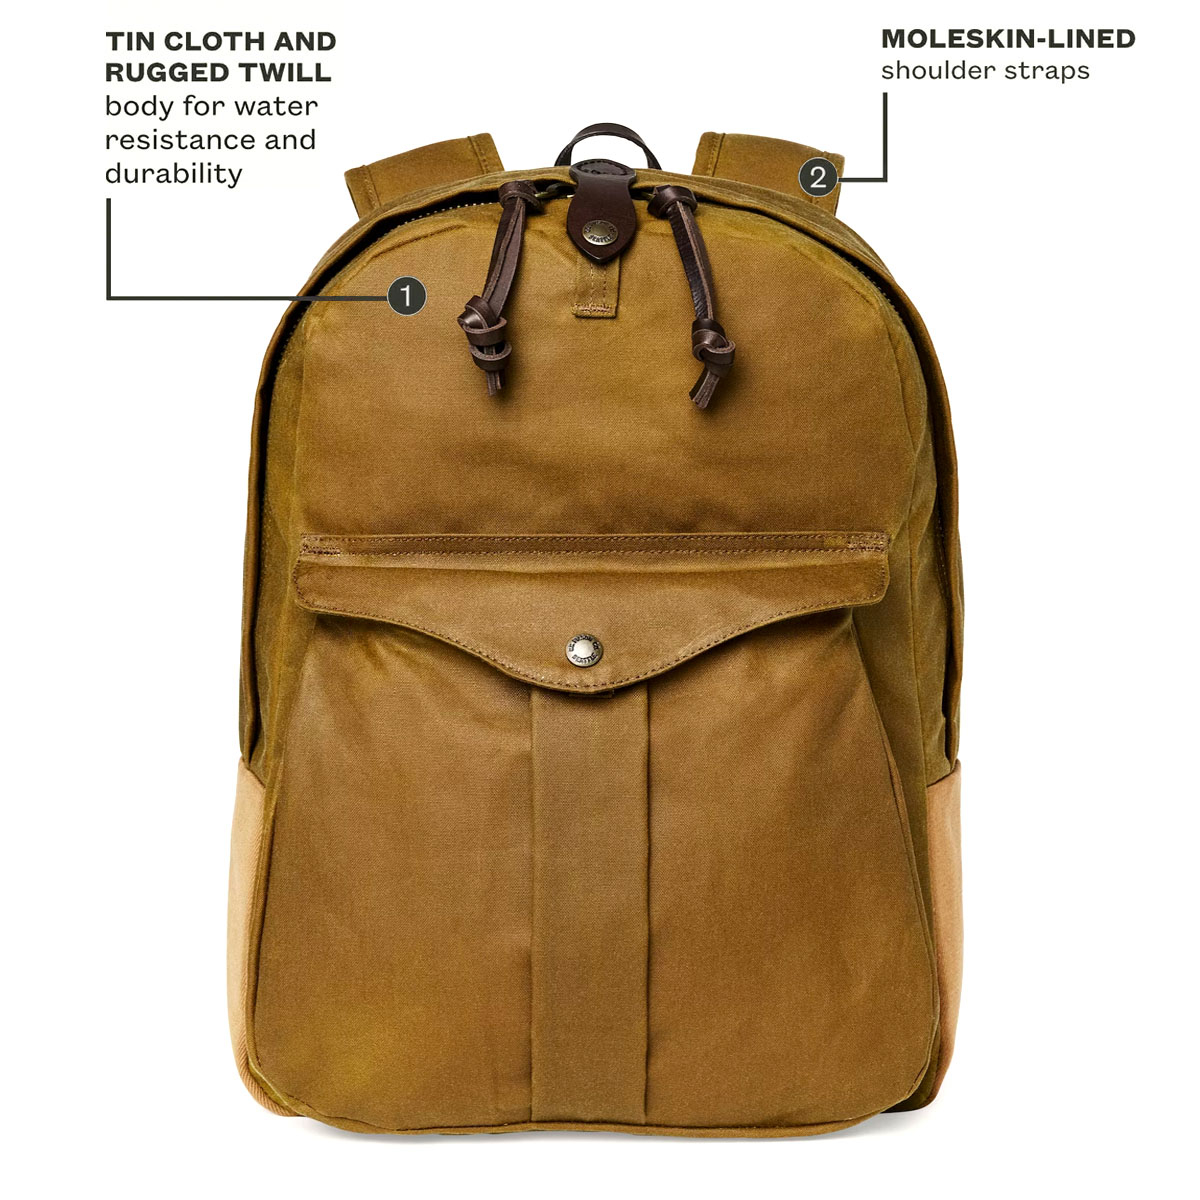 Filson Journeyman Backpack Tan, made of Tin Cloth and Rugged Twill Canvas for waterproofing and durability